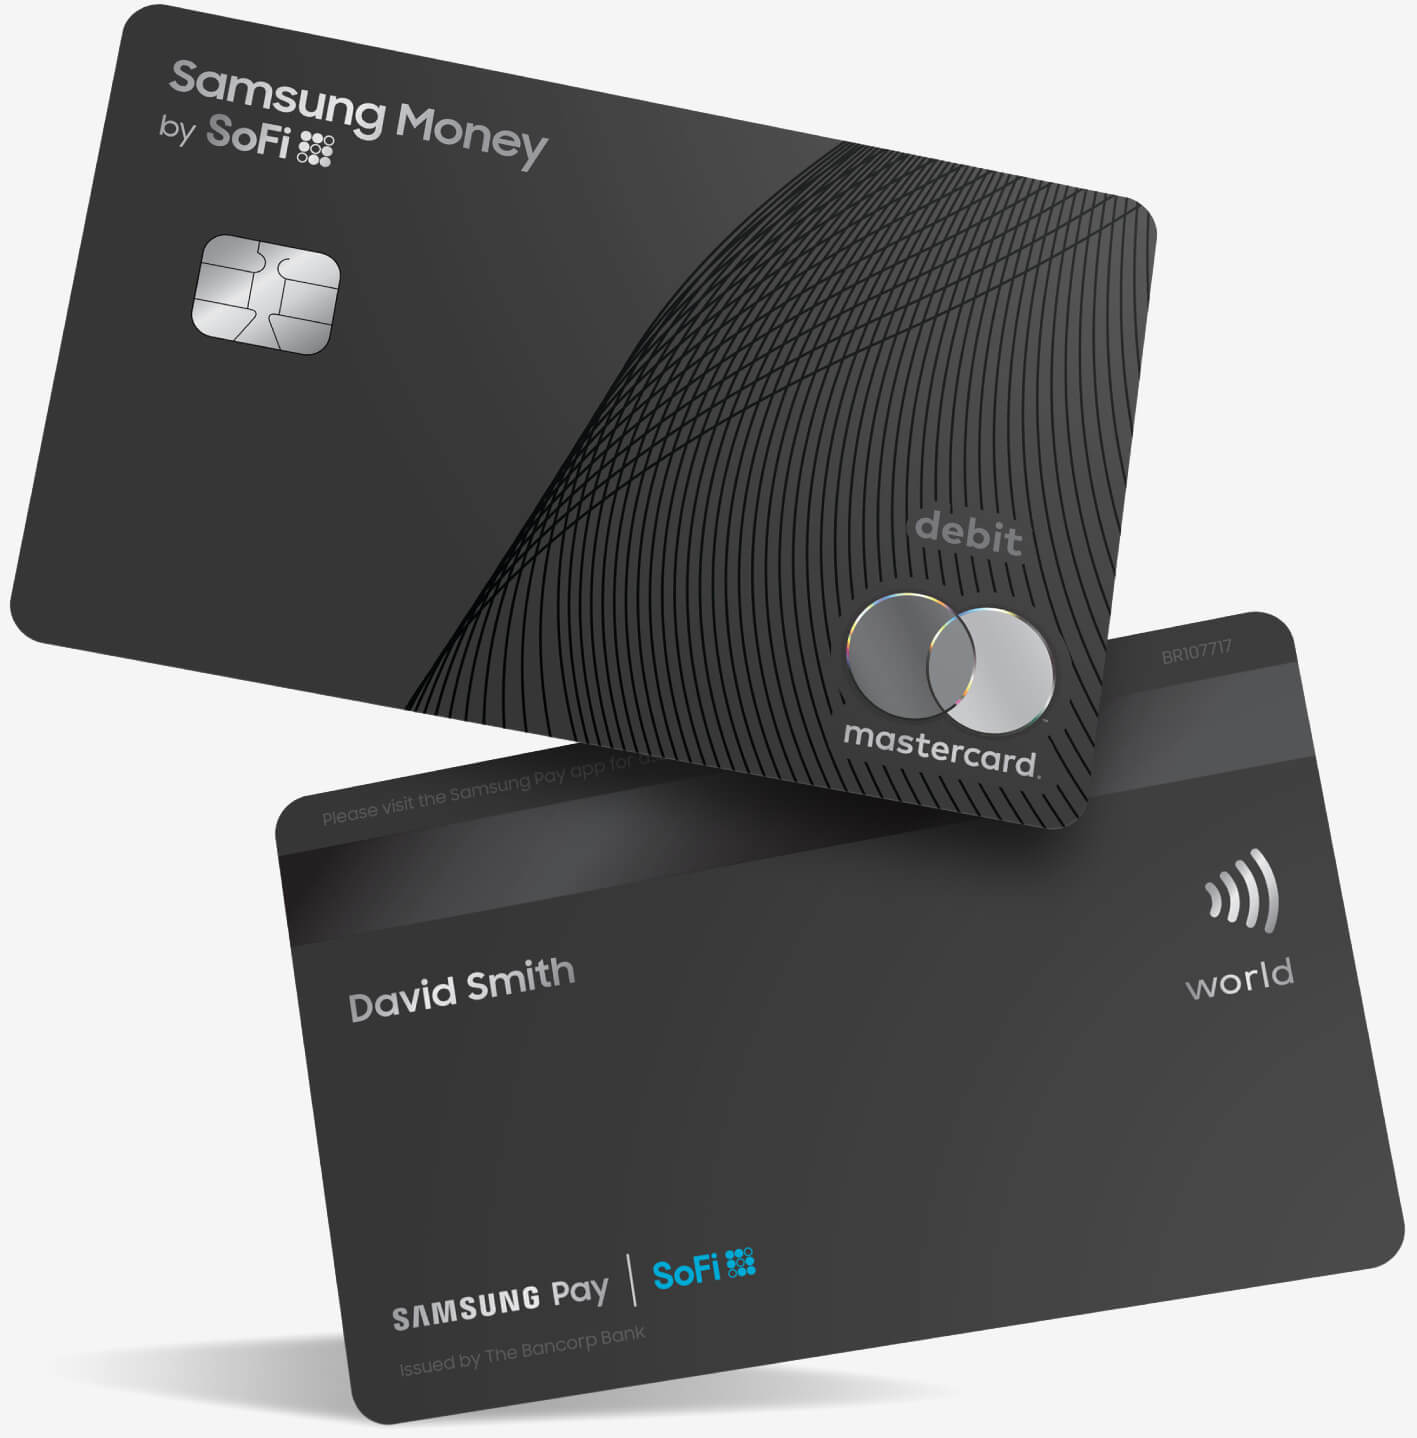 Samsung's new debit card is tightly integrated with Samsung Pay